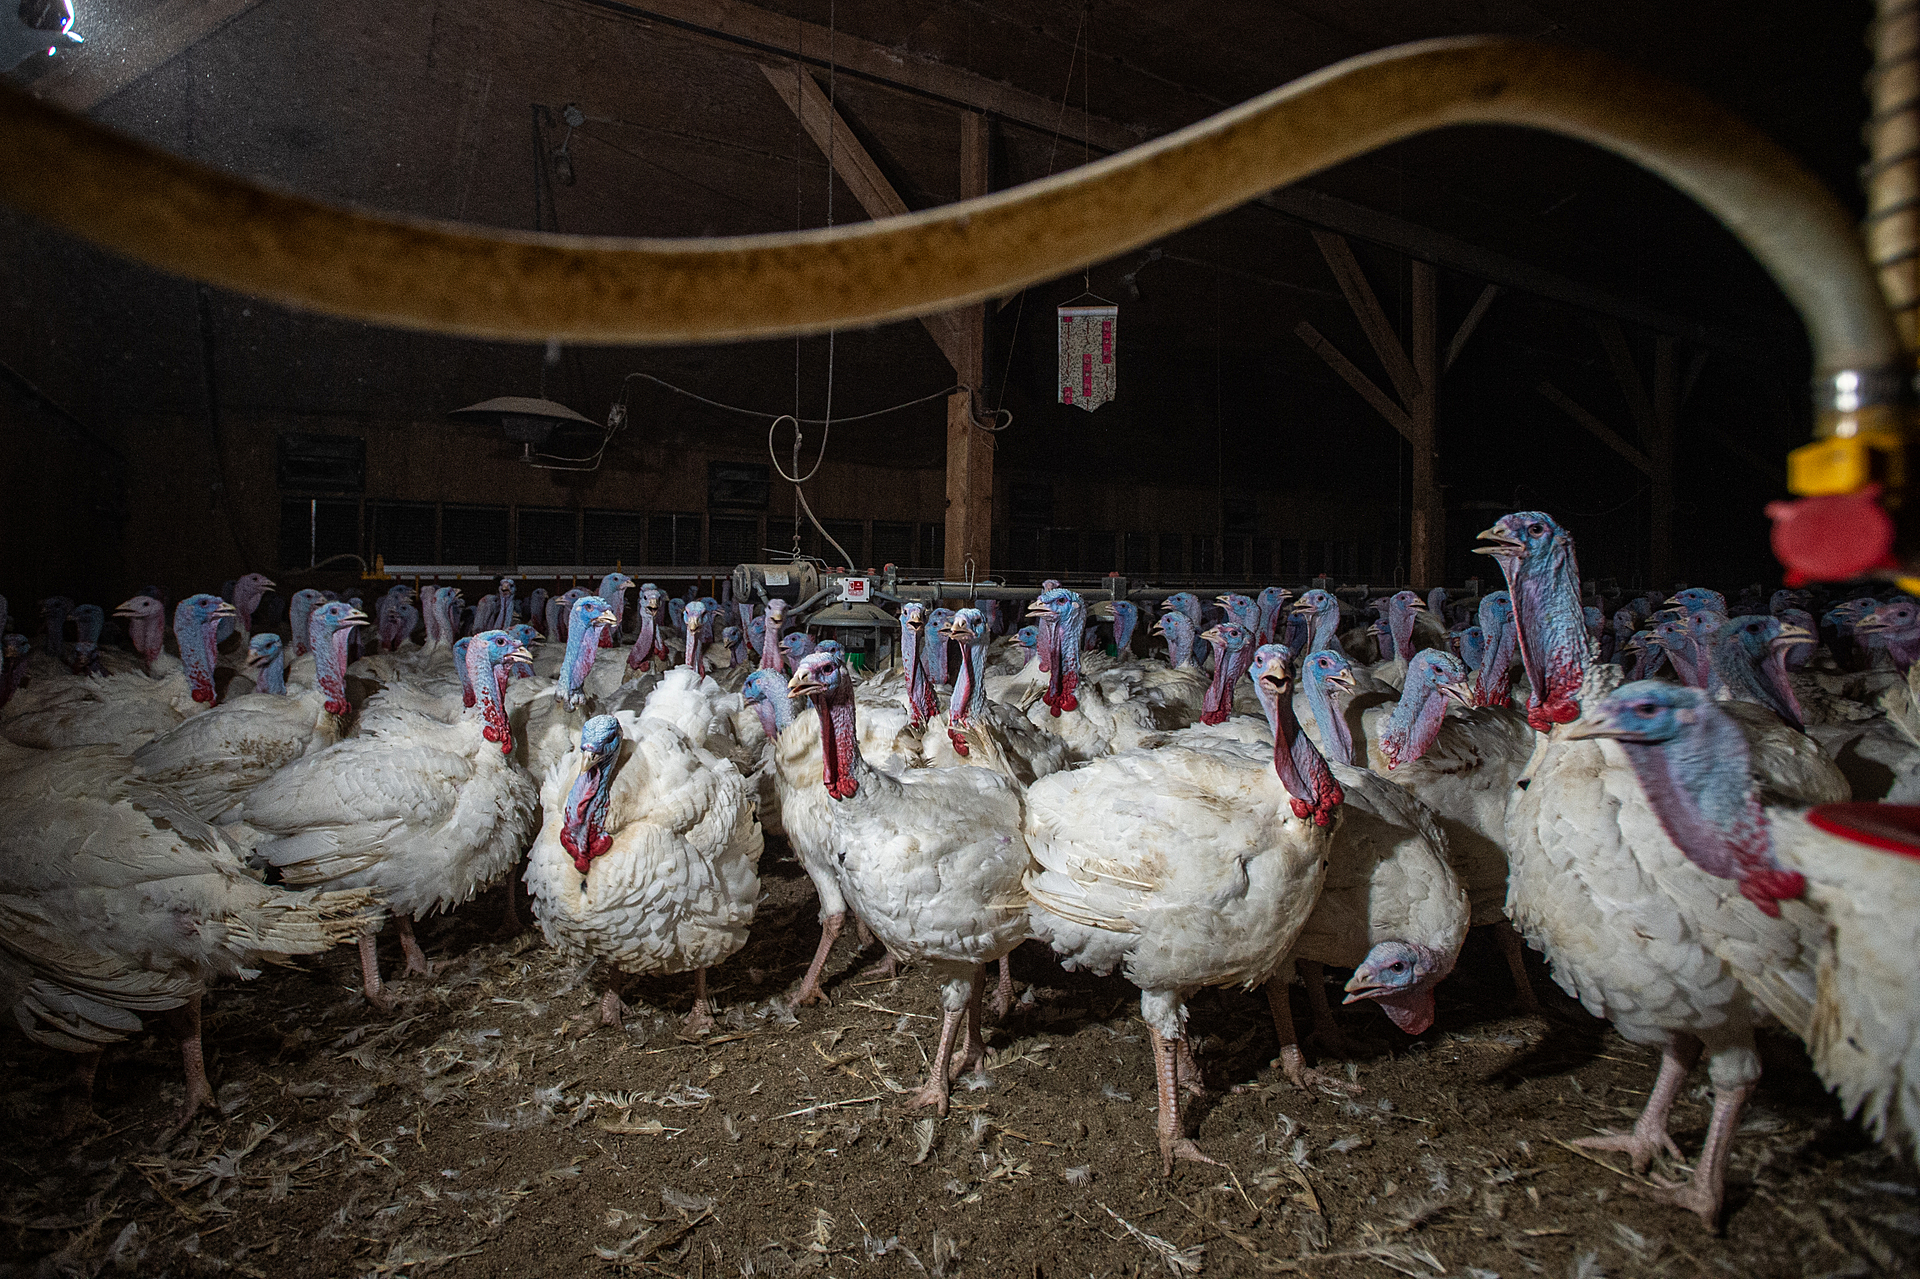 Thousands of turkeys inside a factory farm. The heat causes them to pant.